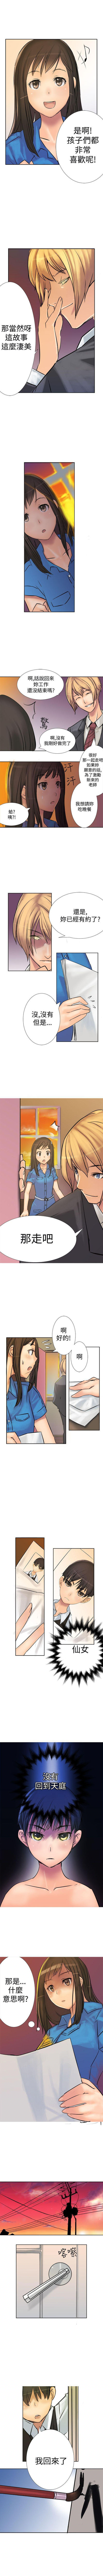 Transexual 望月仙女傳說 1-38 Submissive - Page 5